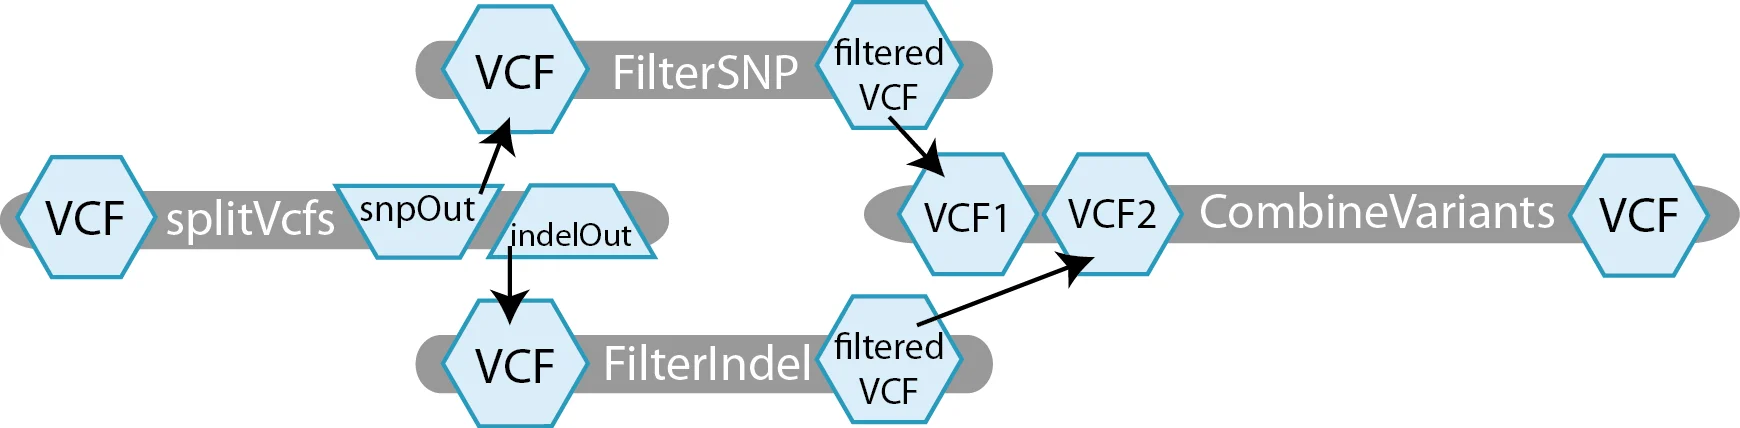 Diagram depicting example workflow that uses branching. First, VCFs are used as input to the process splitVCFs resulting in a VCF containing SNPs and a VCF containing Indels. The VCF containing SNPs is then run through a process called FilerSNPS, whereas the output VCF containing Indels is run through a paralllel process called FilterIndels. The two resulting VCFs are then used as input to a process called CombineVariants which produces one final VCF output.